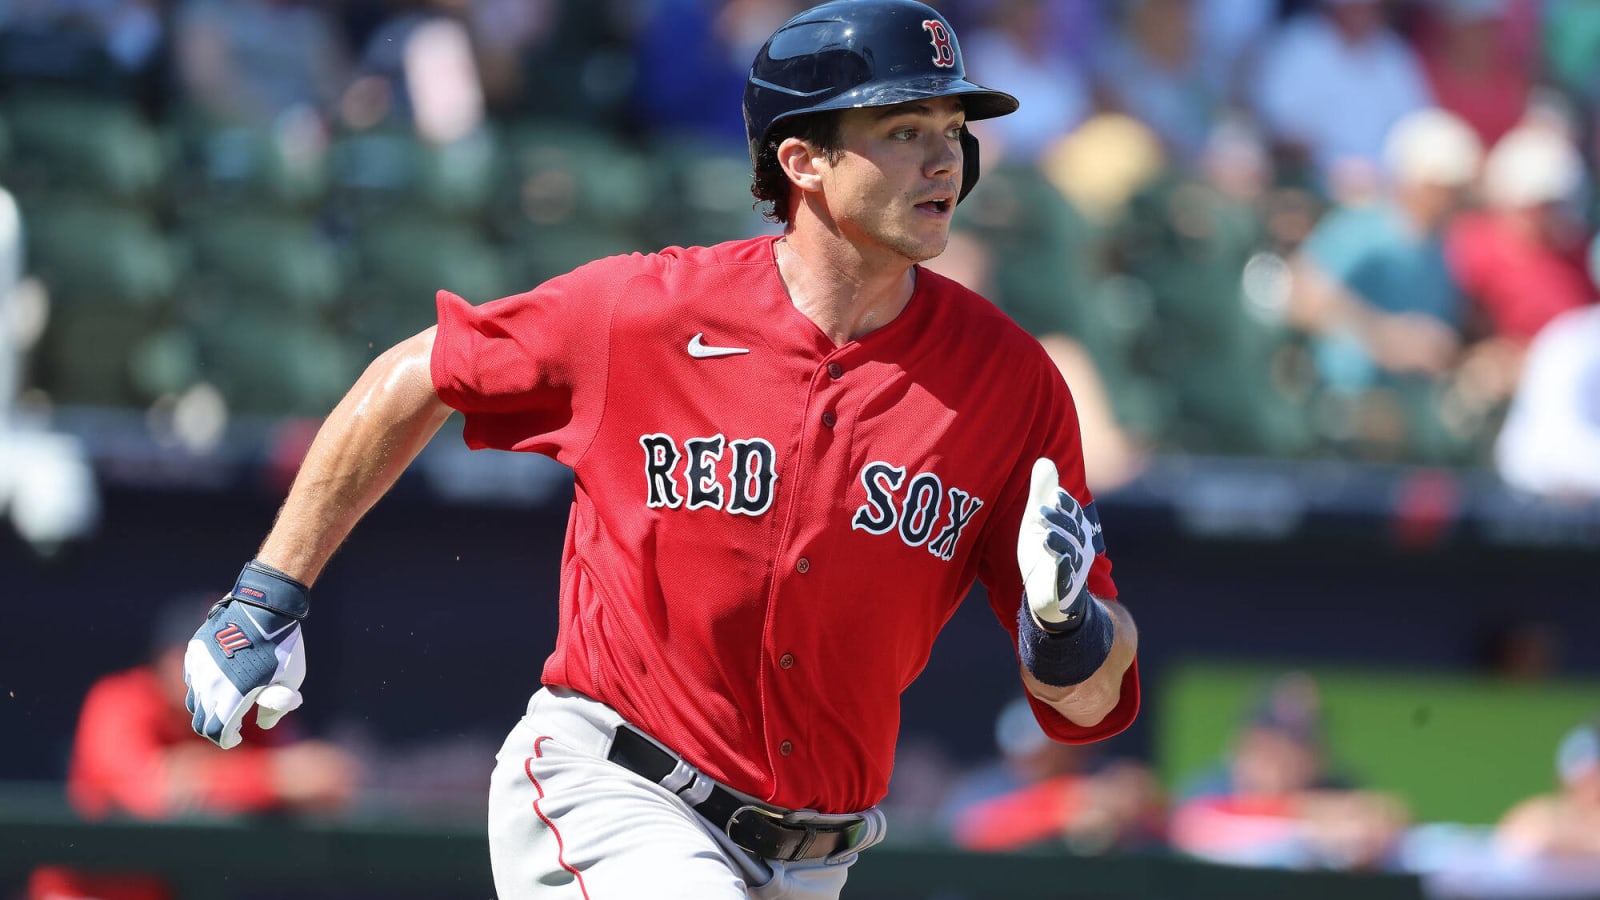 Red Sox option Bobby Dalbec to Triple-A Worcester, clearing way for Yu Chang to make team